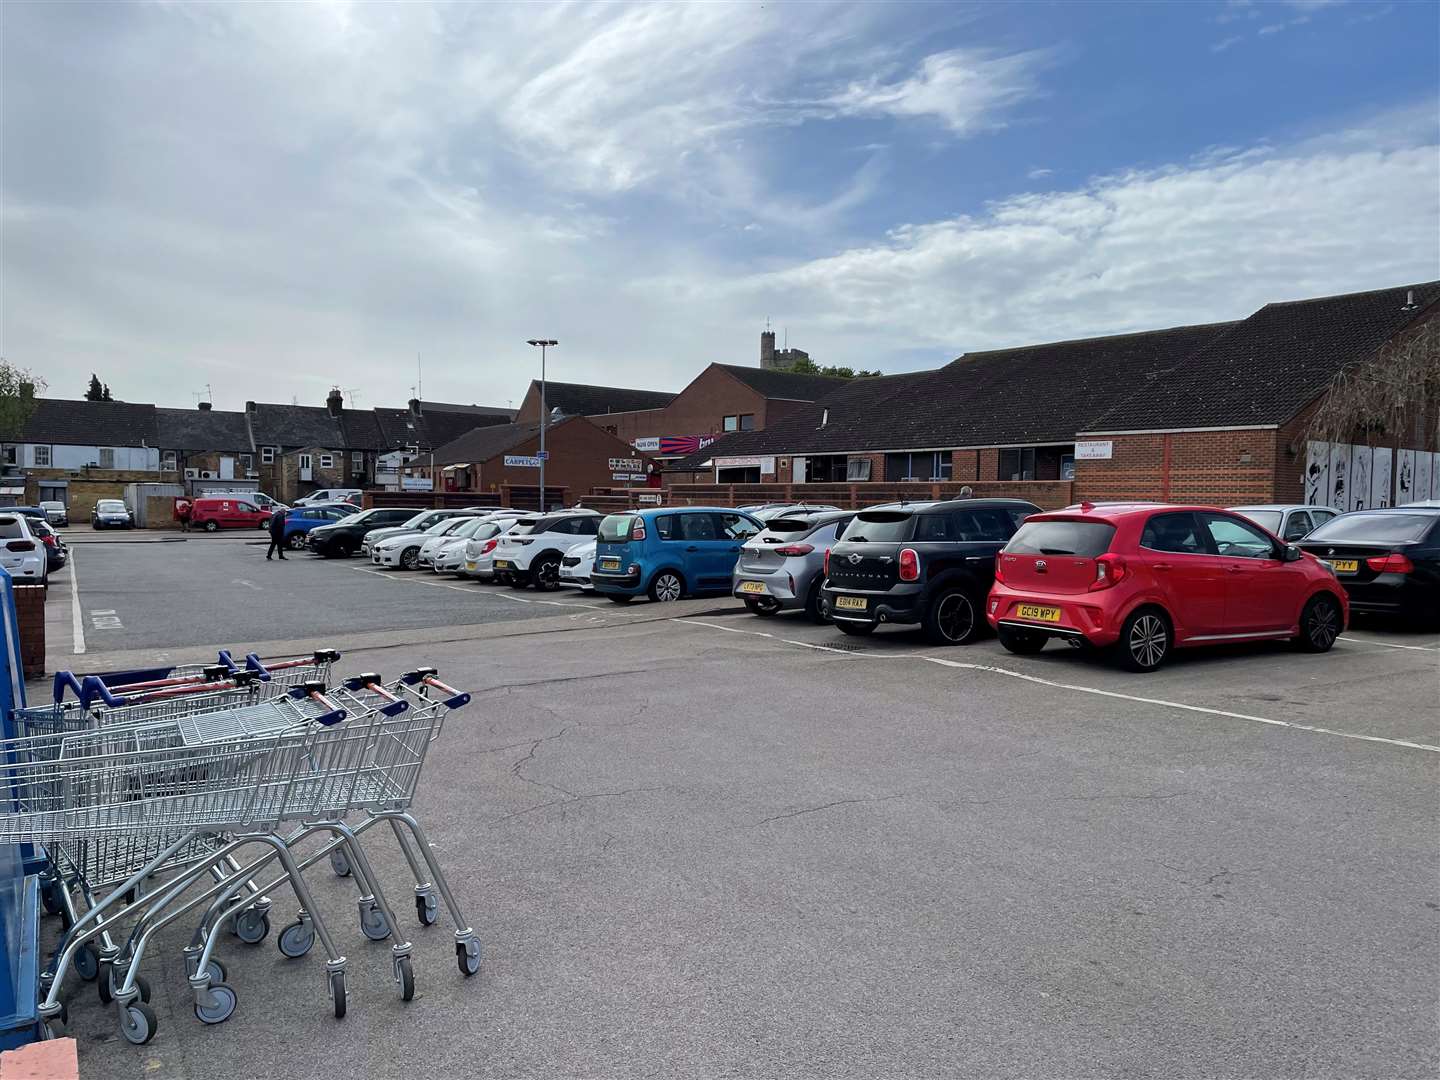 Shopkeepers said the car park is usually packed but now you can easily find a space